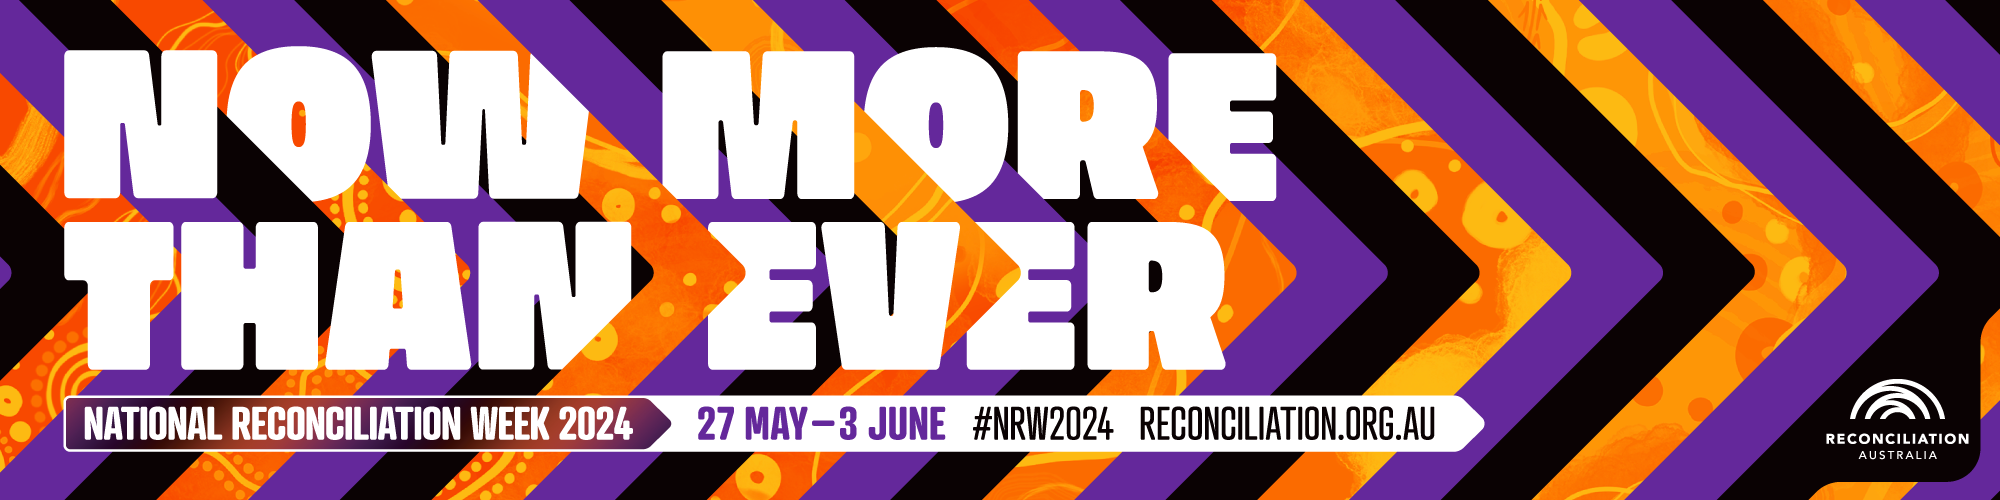 National Reconciliation Week 2024 web banner